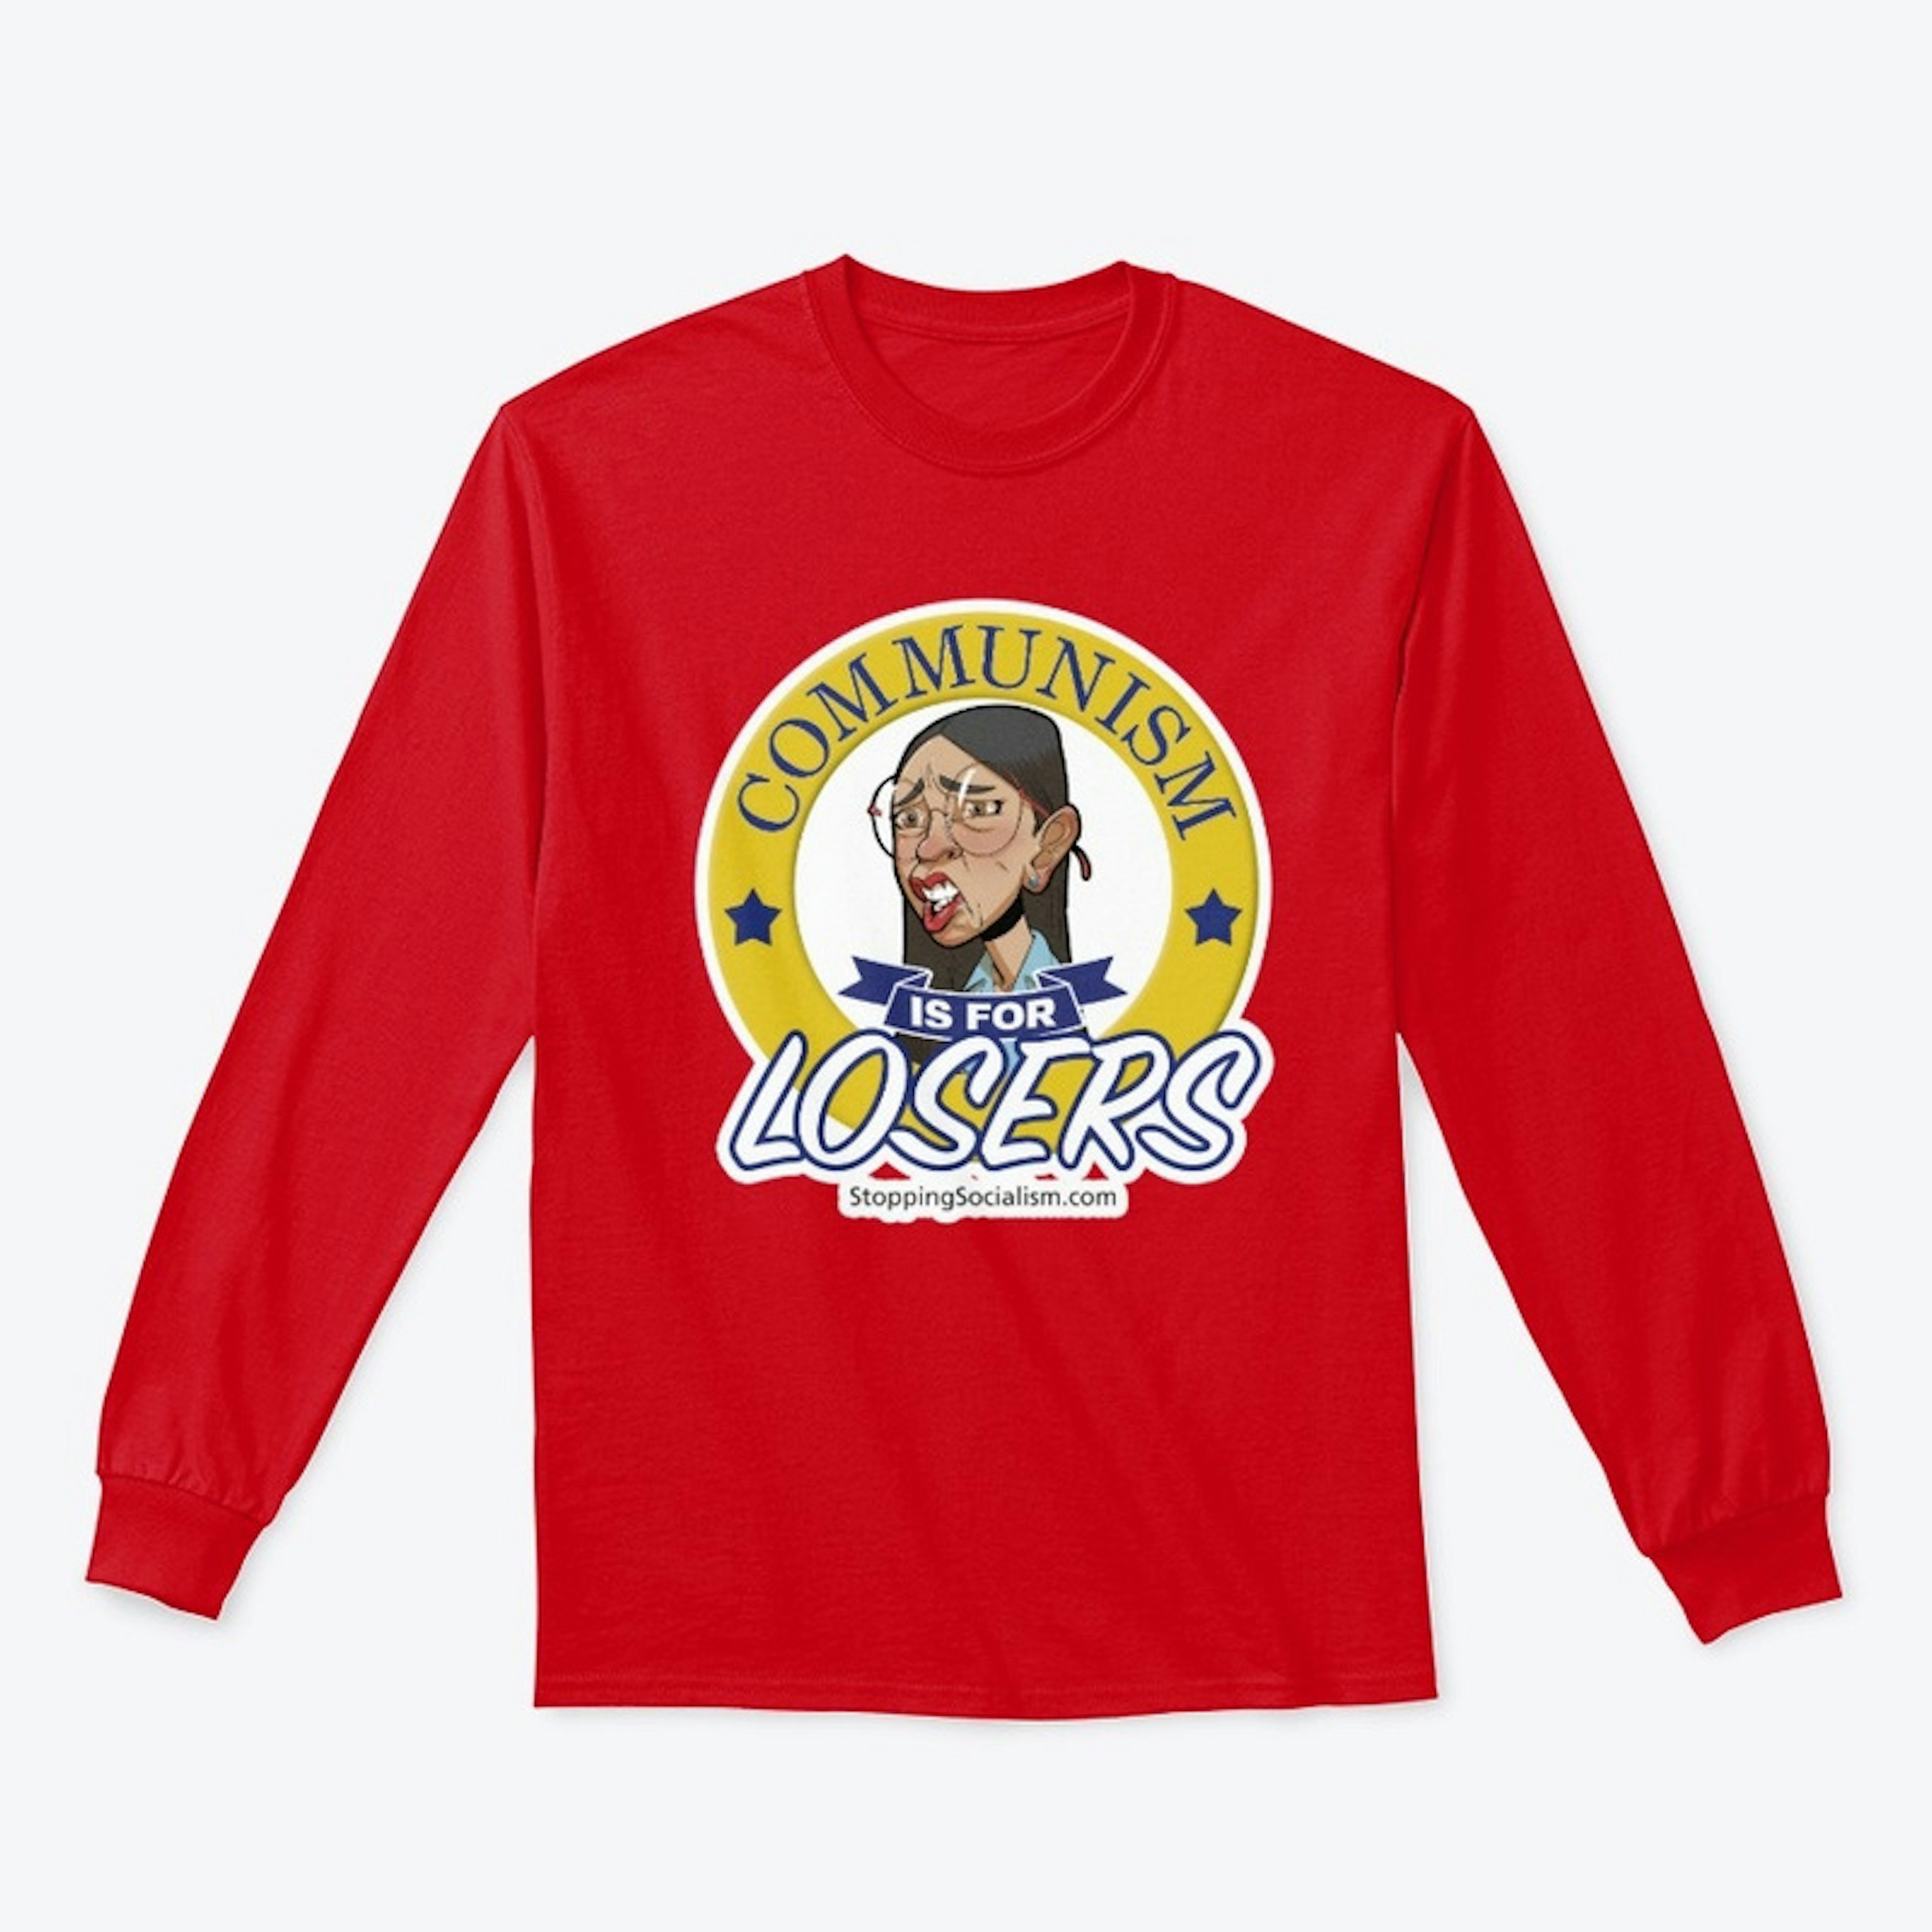 AOC Communism is for Losers Long Sleeve